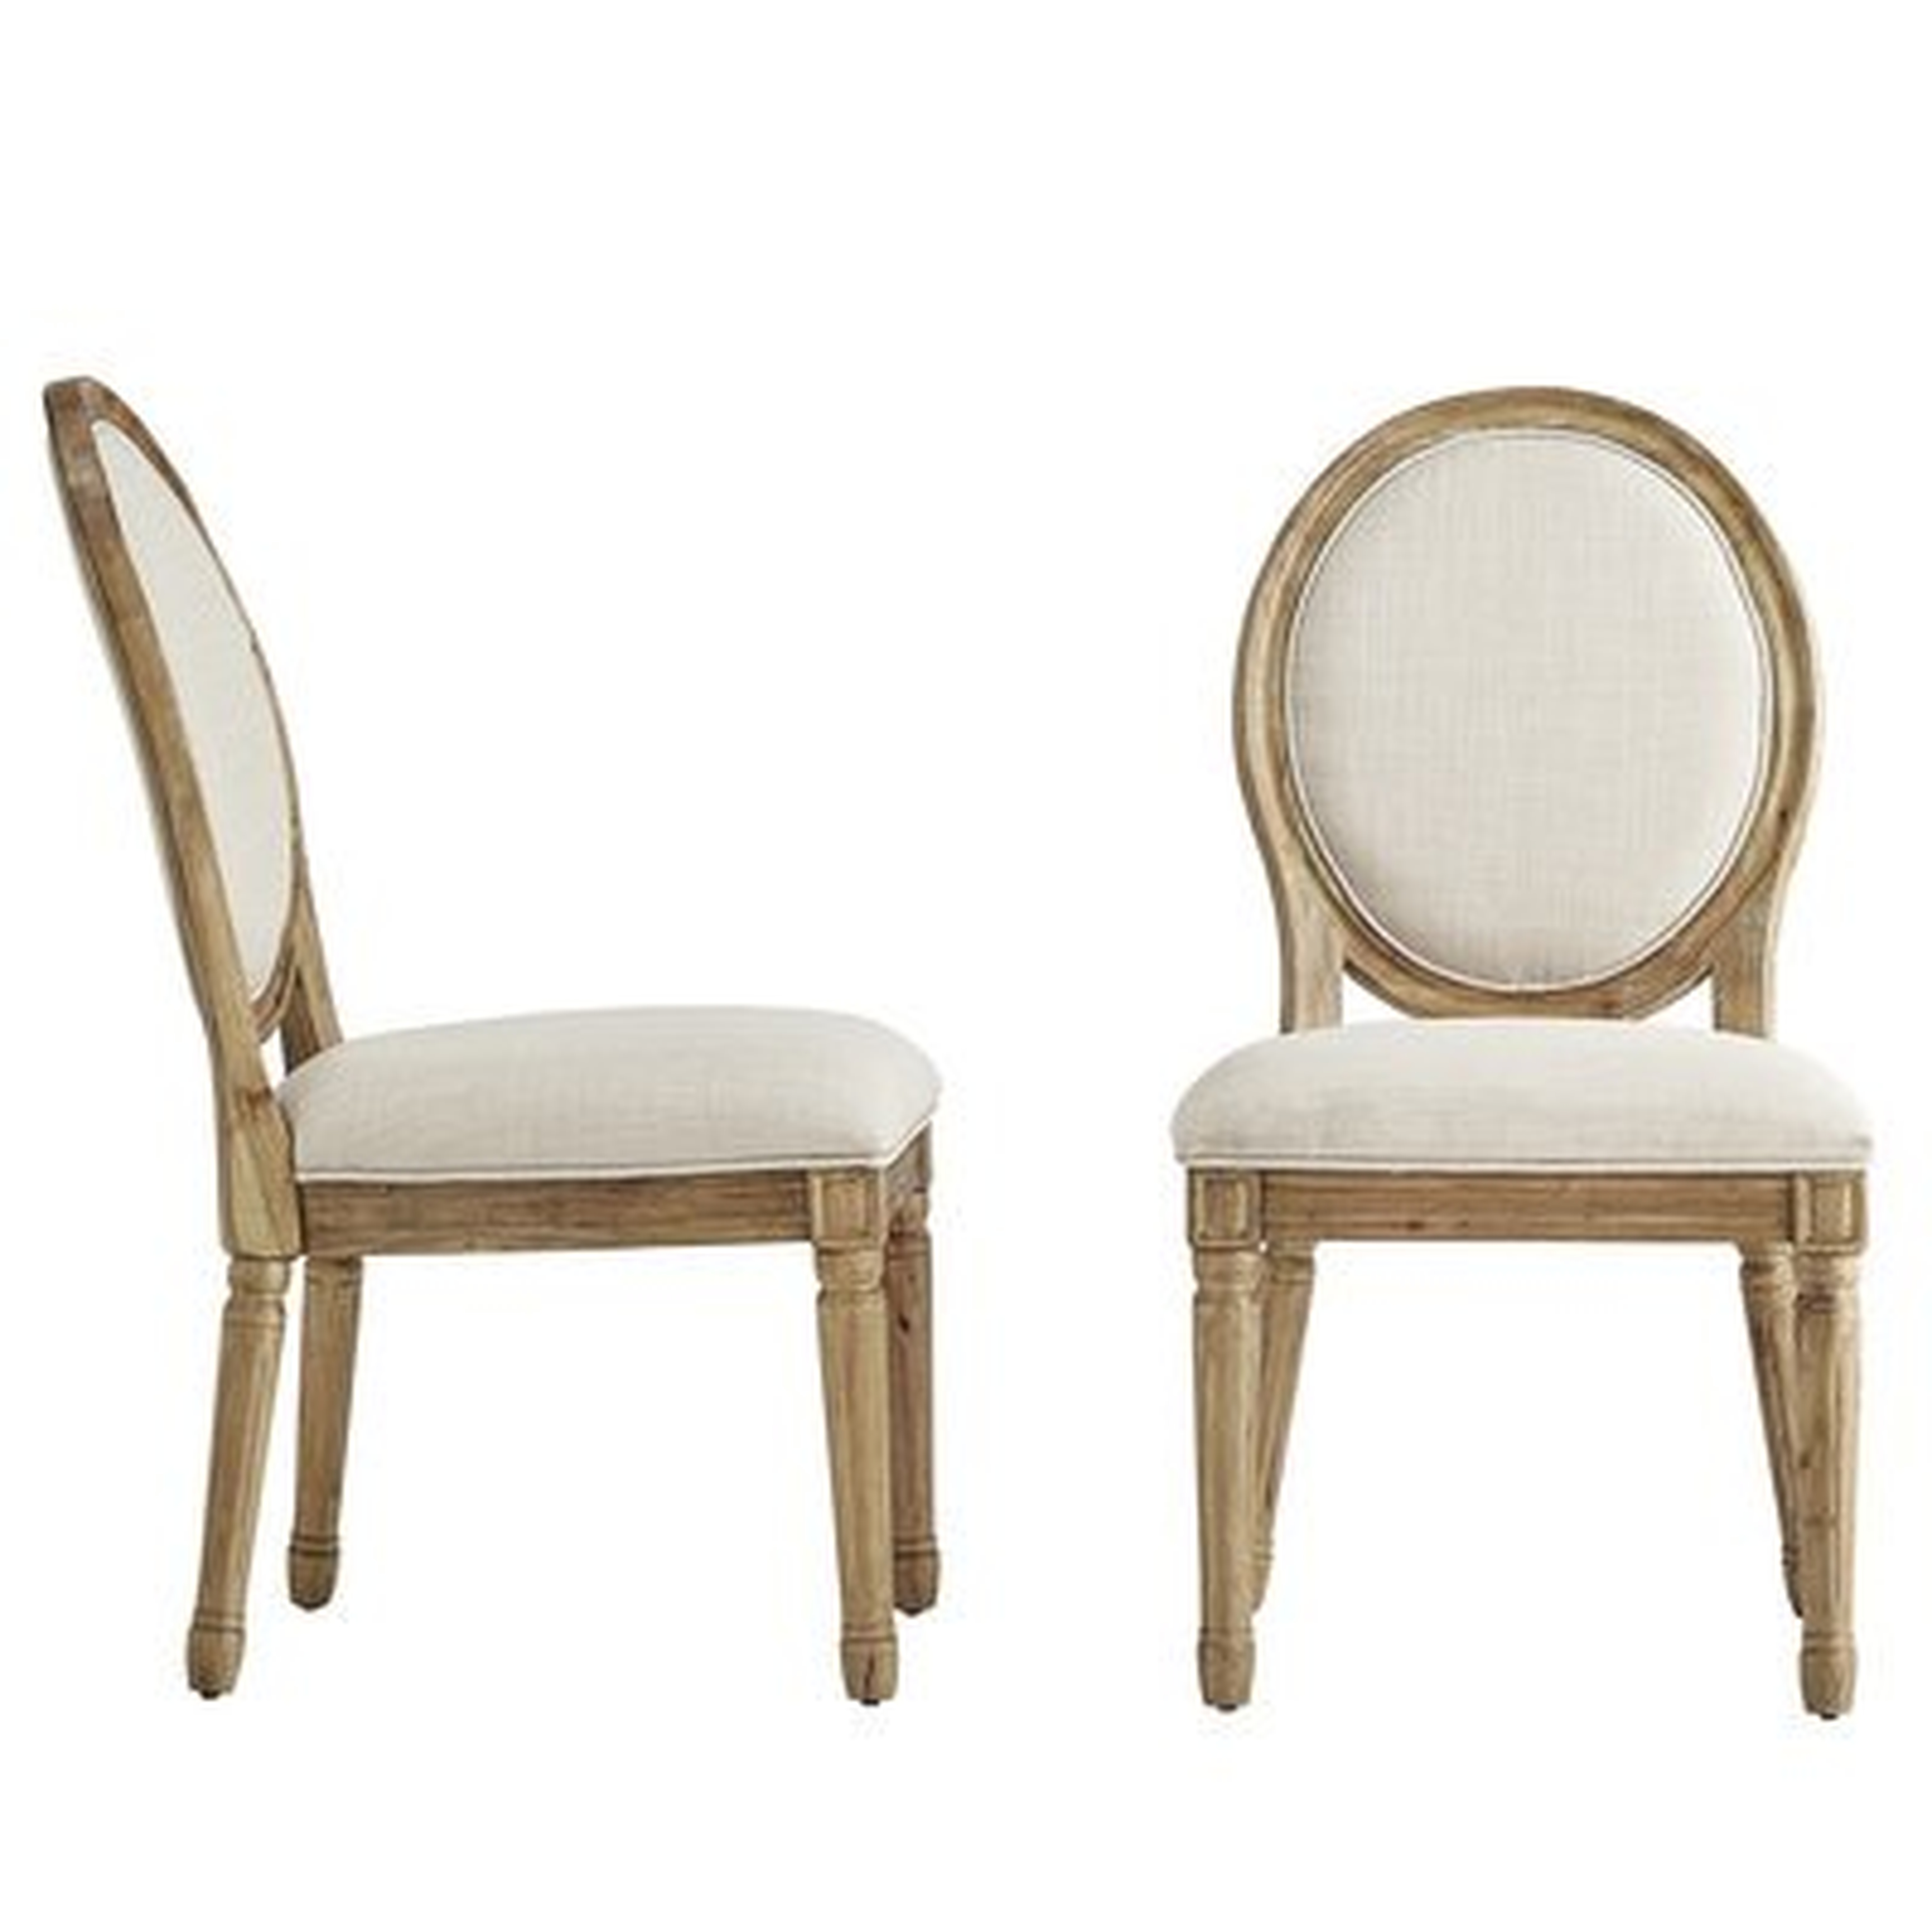 Lachance Round Upholstered Dining Chair (set of 2) - Wayfair